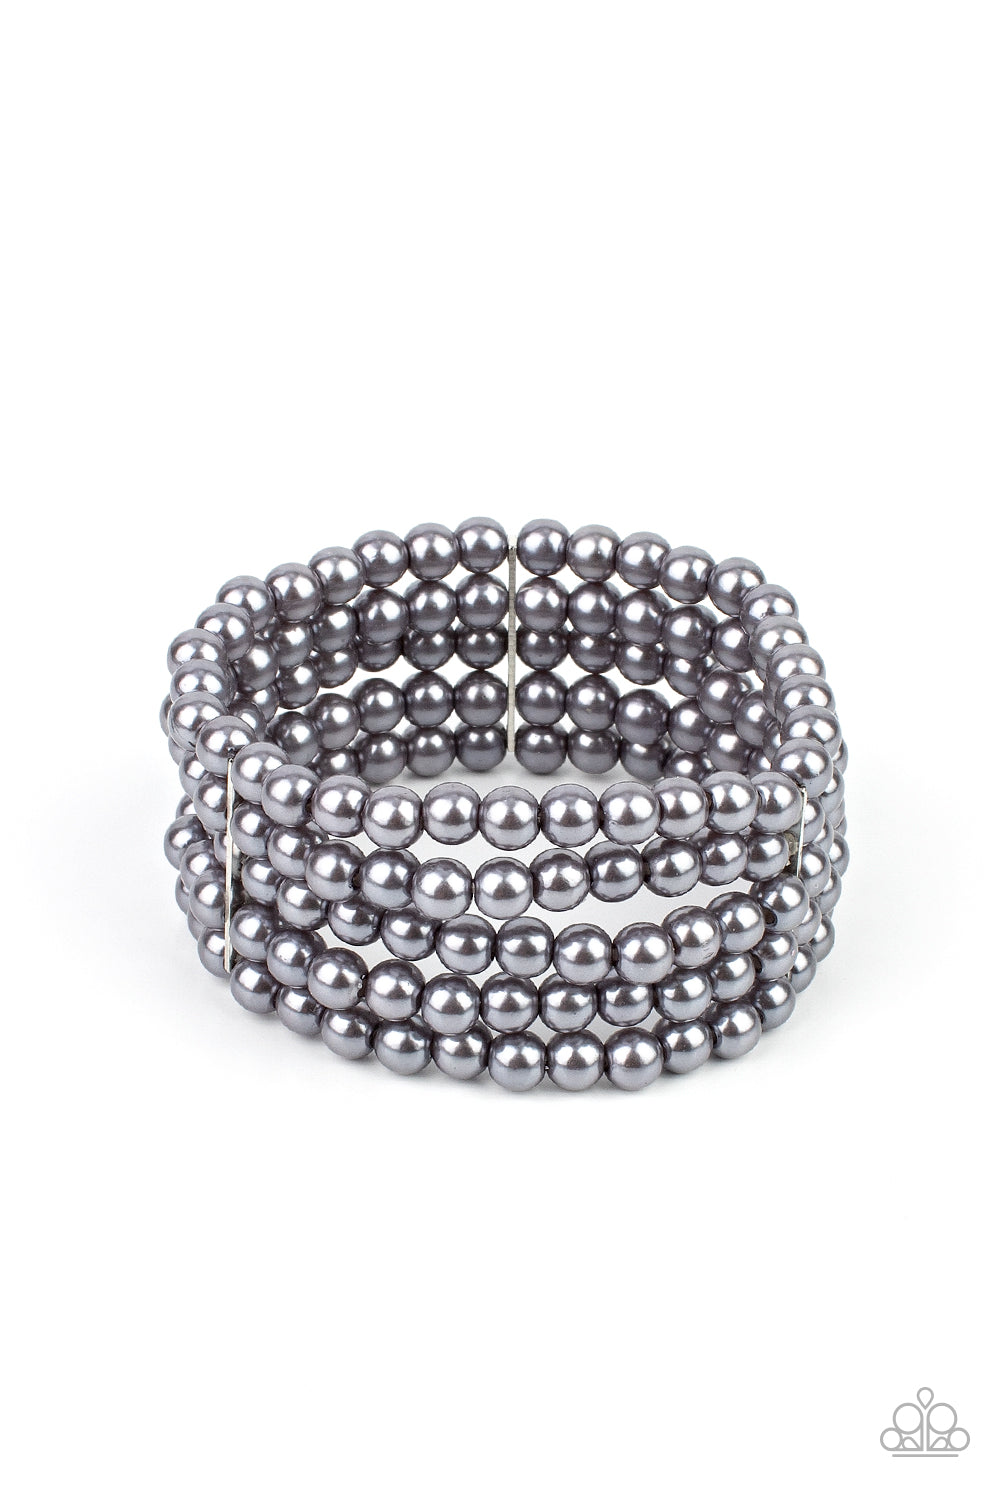 Paparazzi A Pearly Affair Silver Bracelet A Finishing Touch Jewelry Paparazzi jewelry images